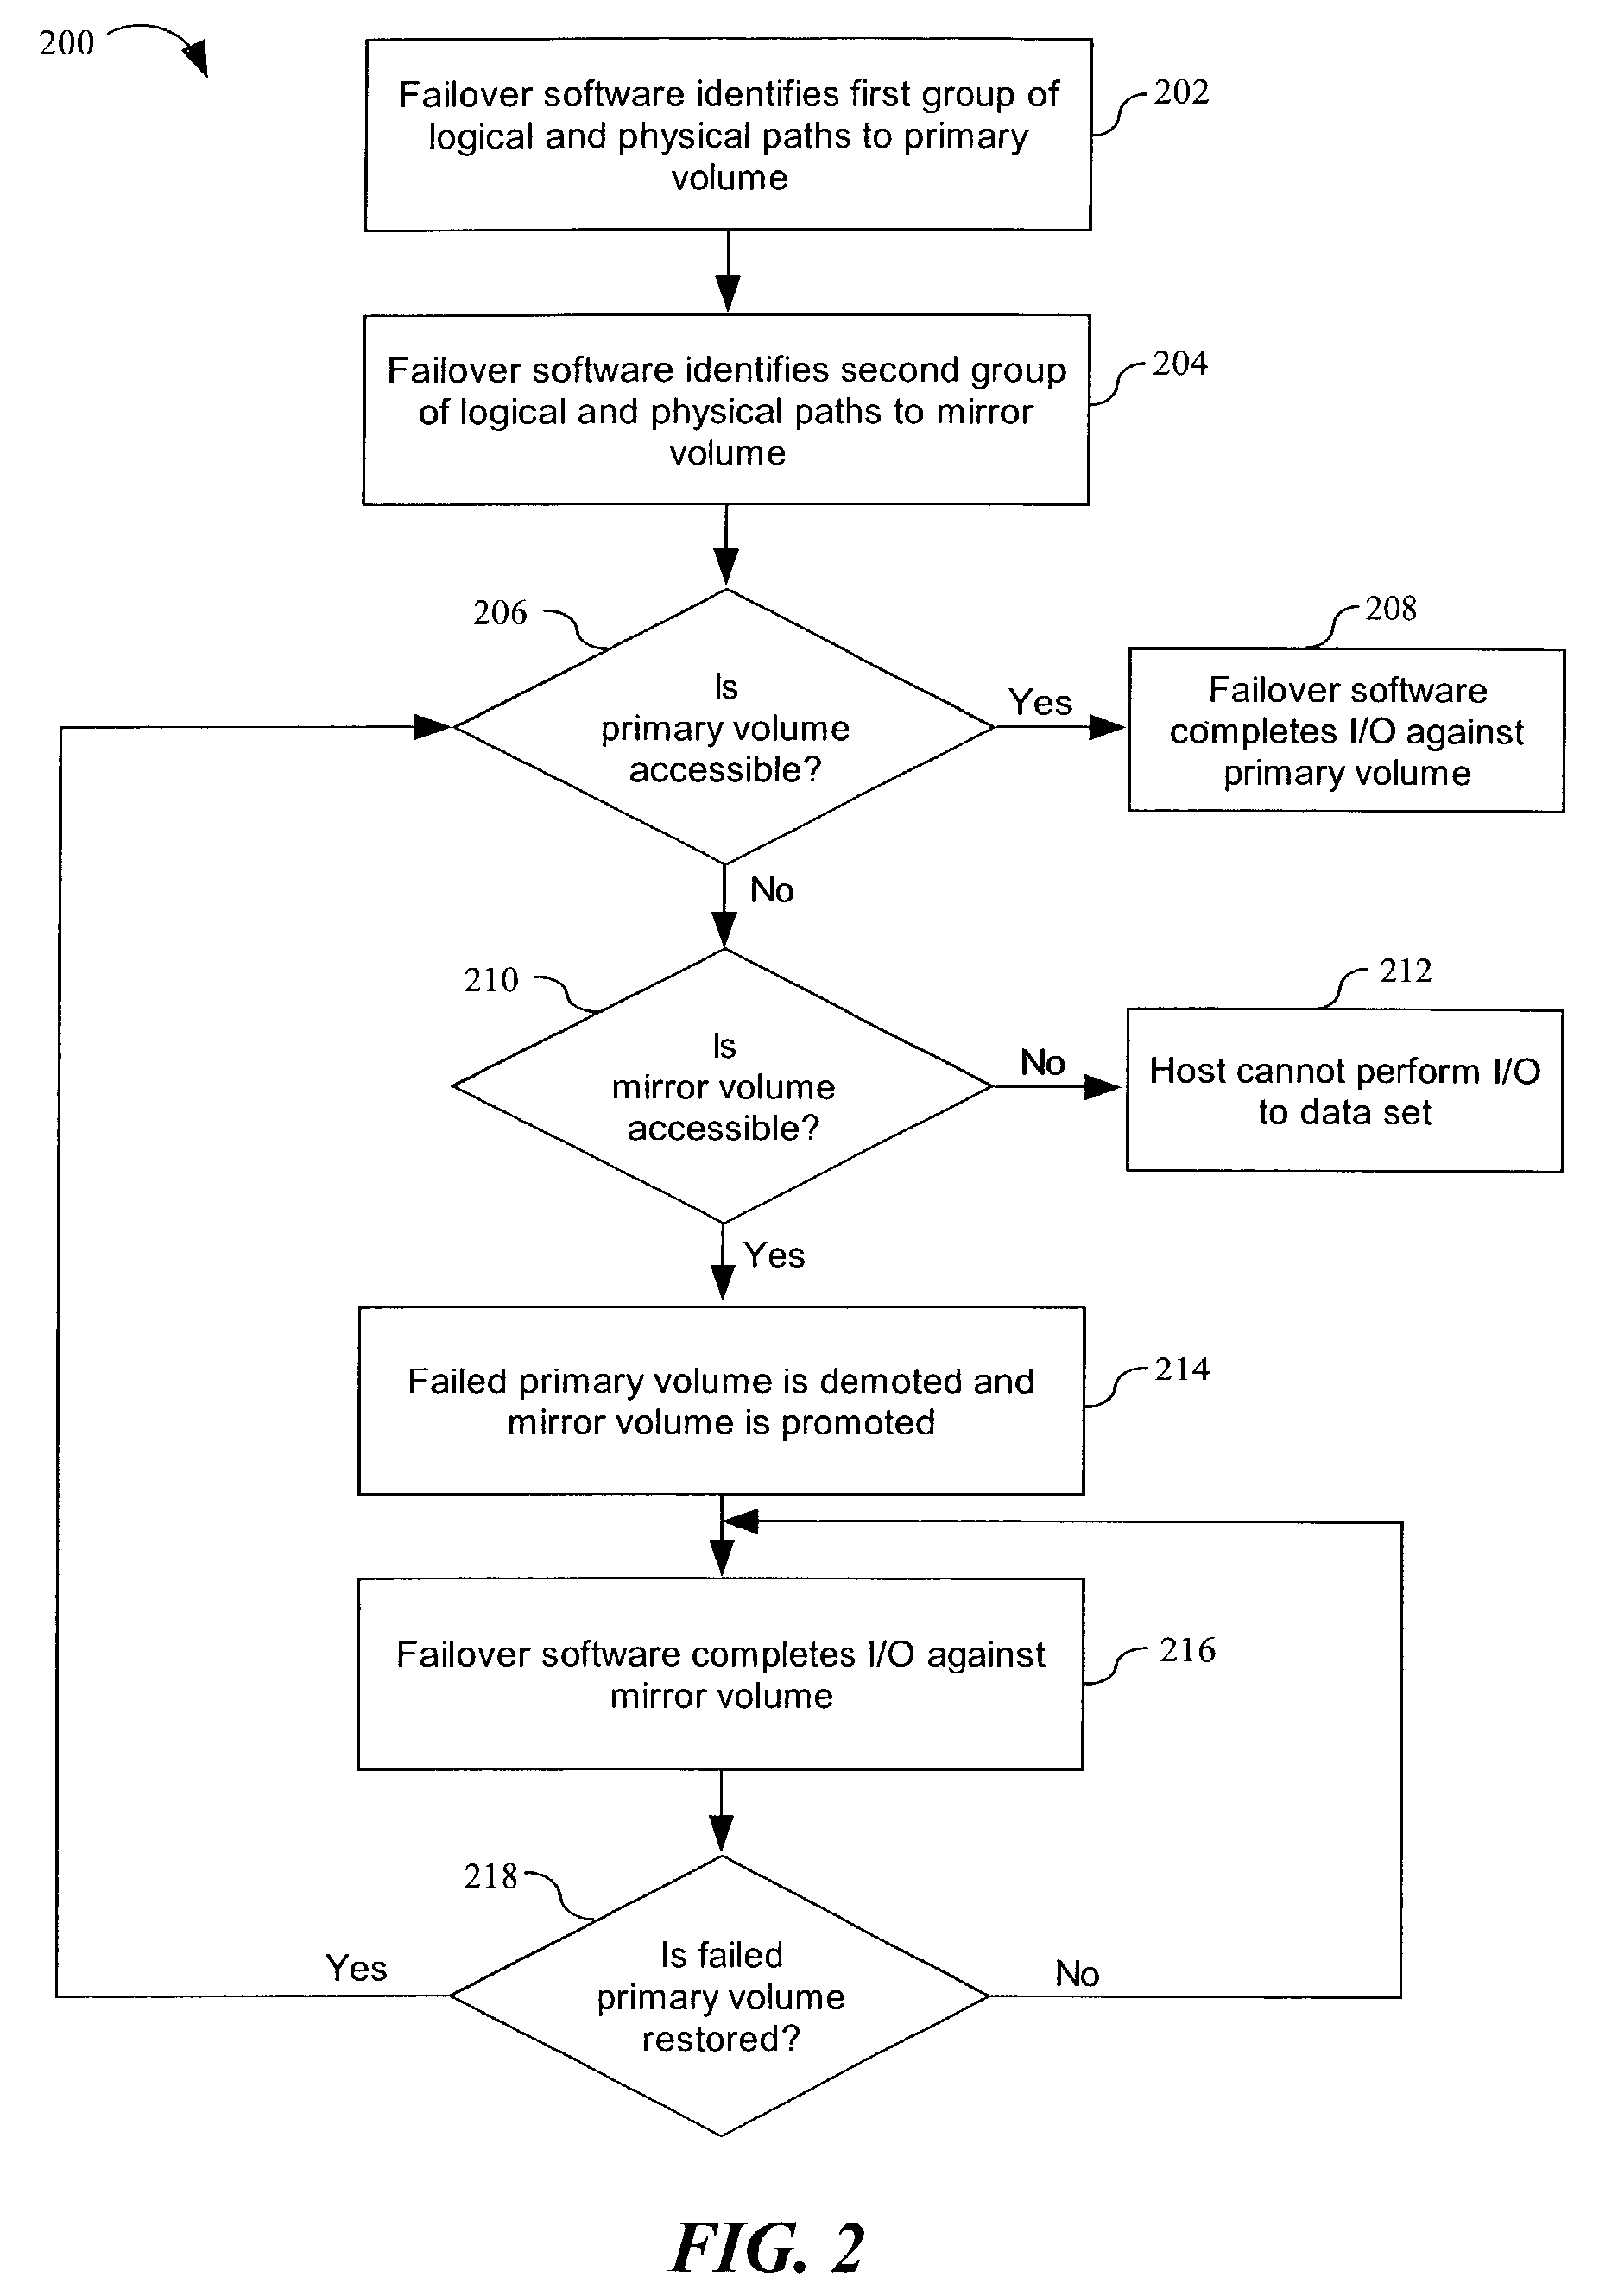 Apparatus and method for enhancing data availability by leveraging primary/backup data storage volumes